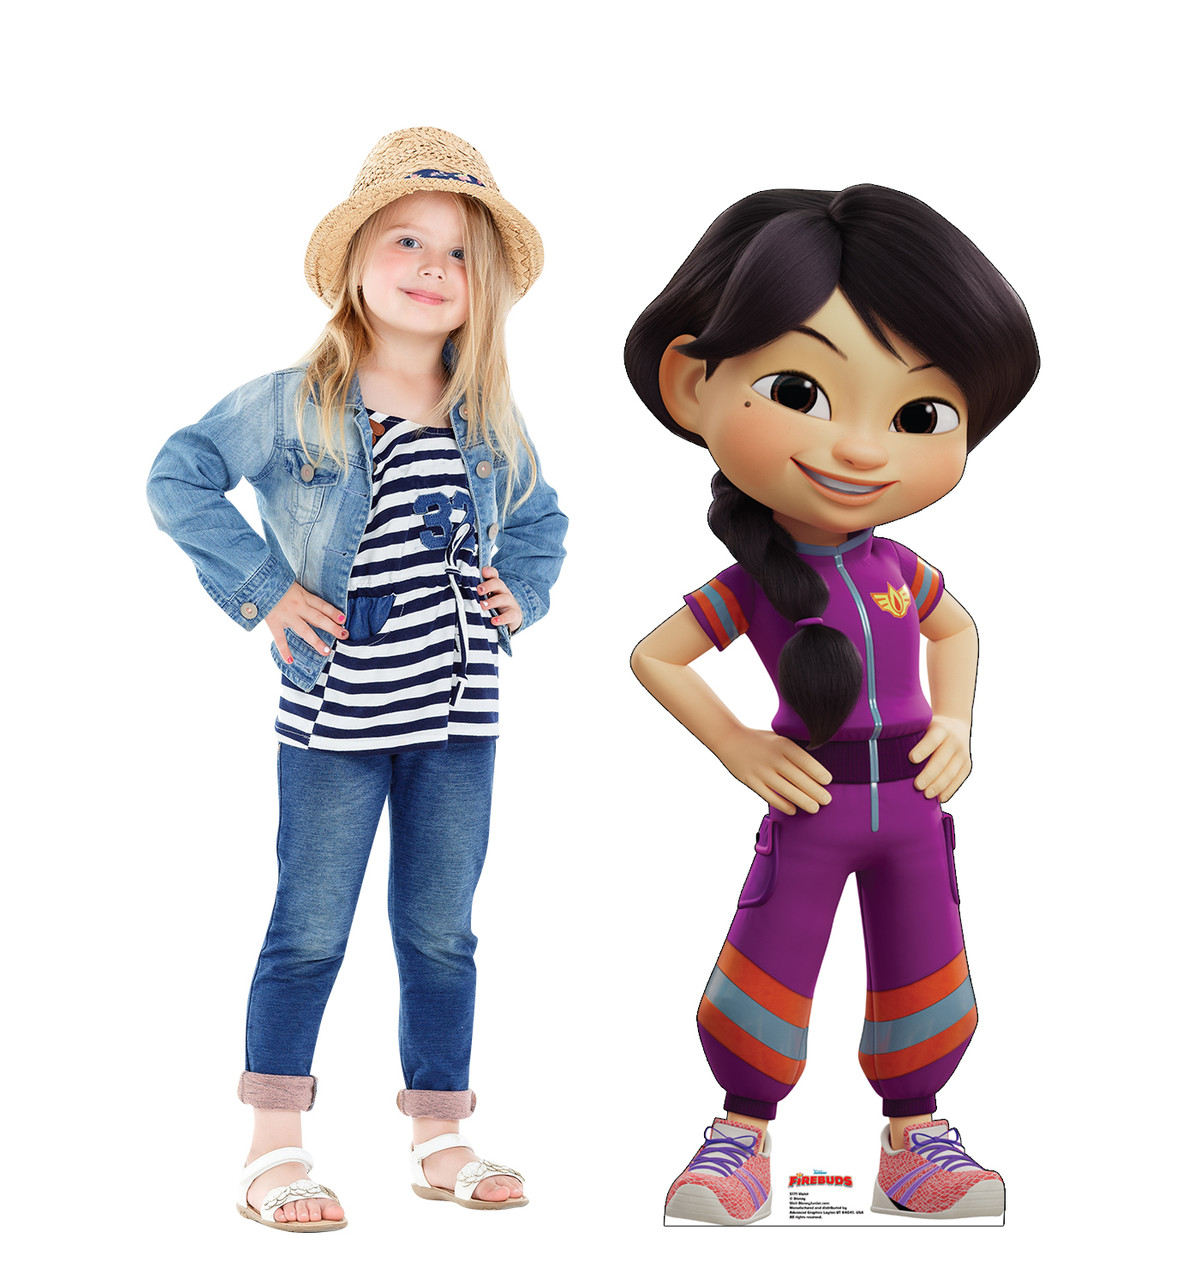 Life-size cardboard standee of Violet with model.